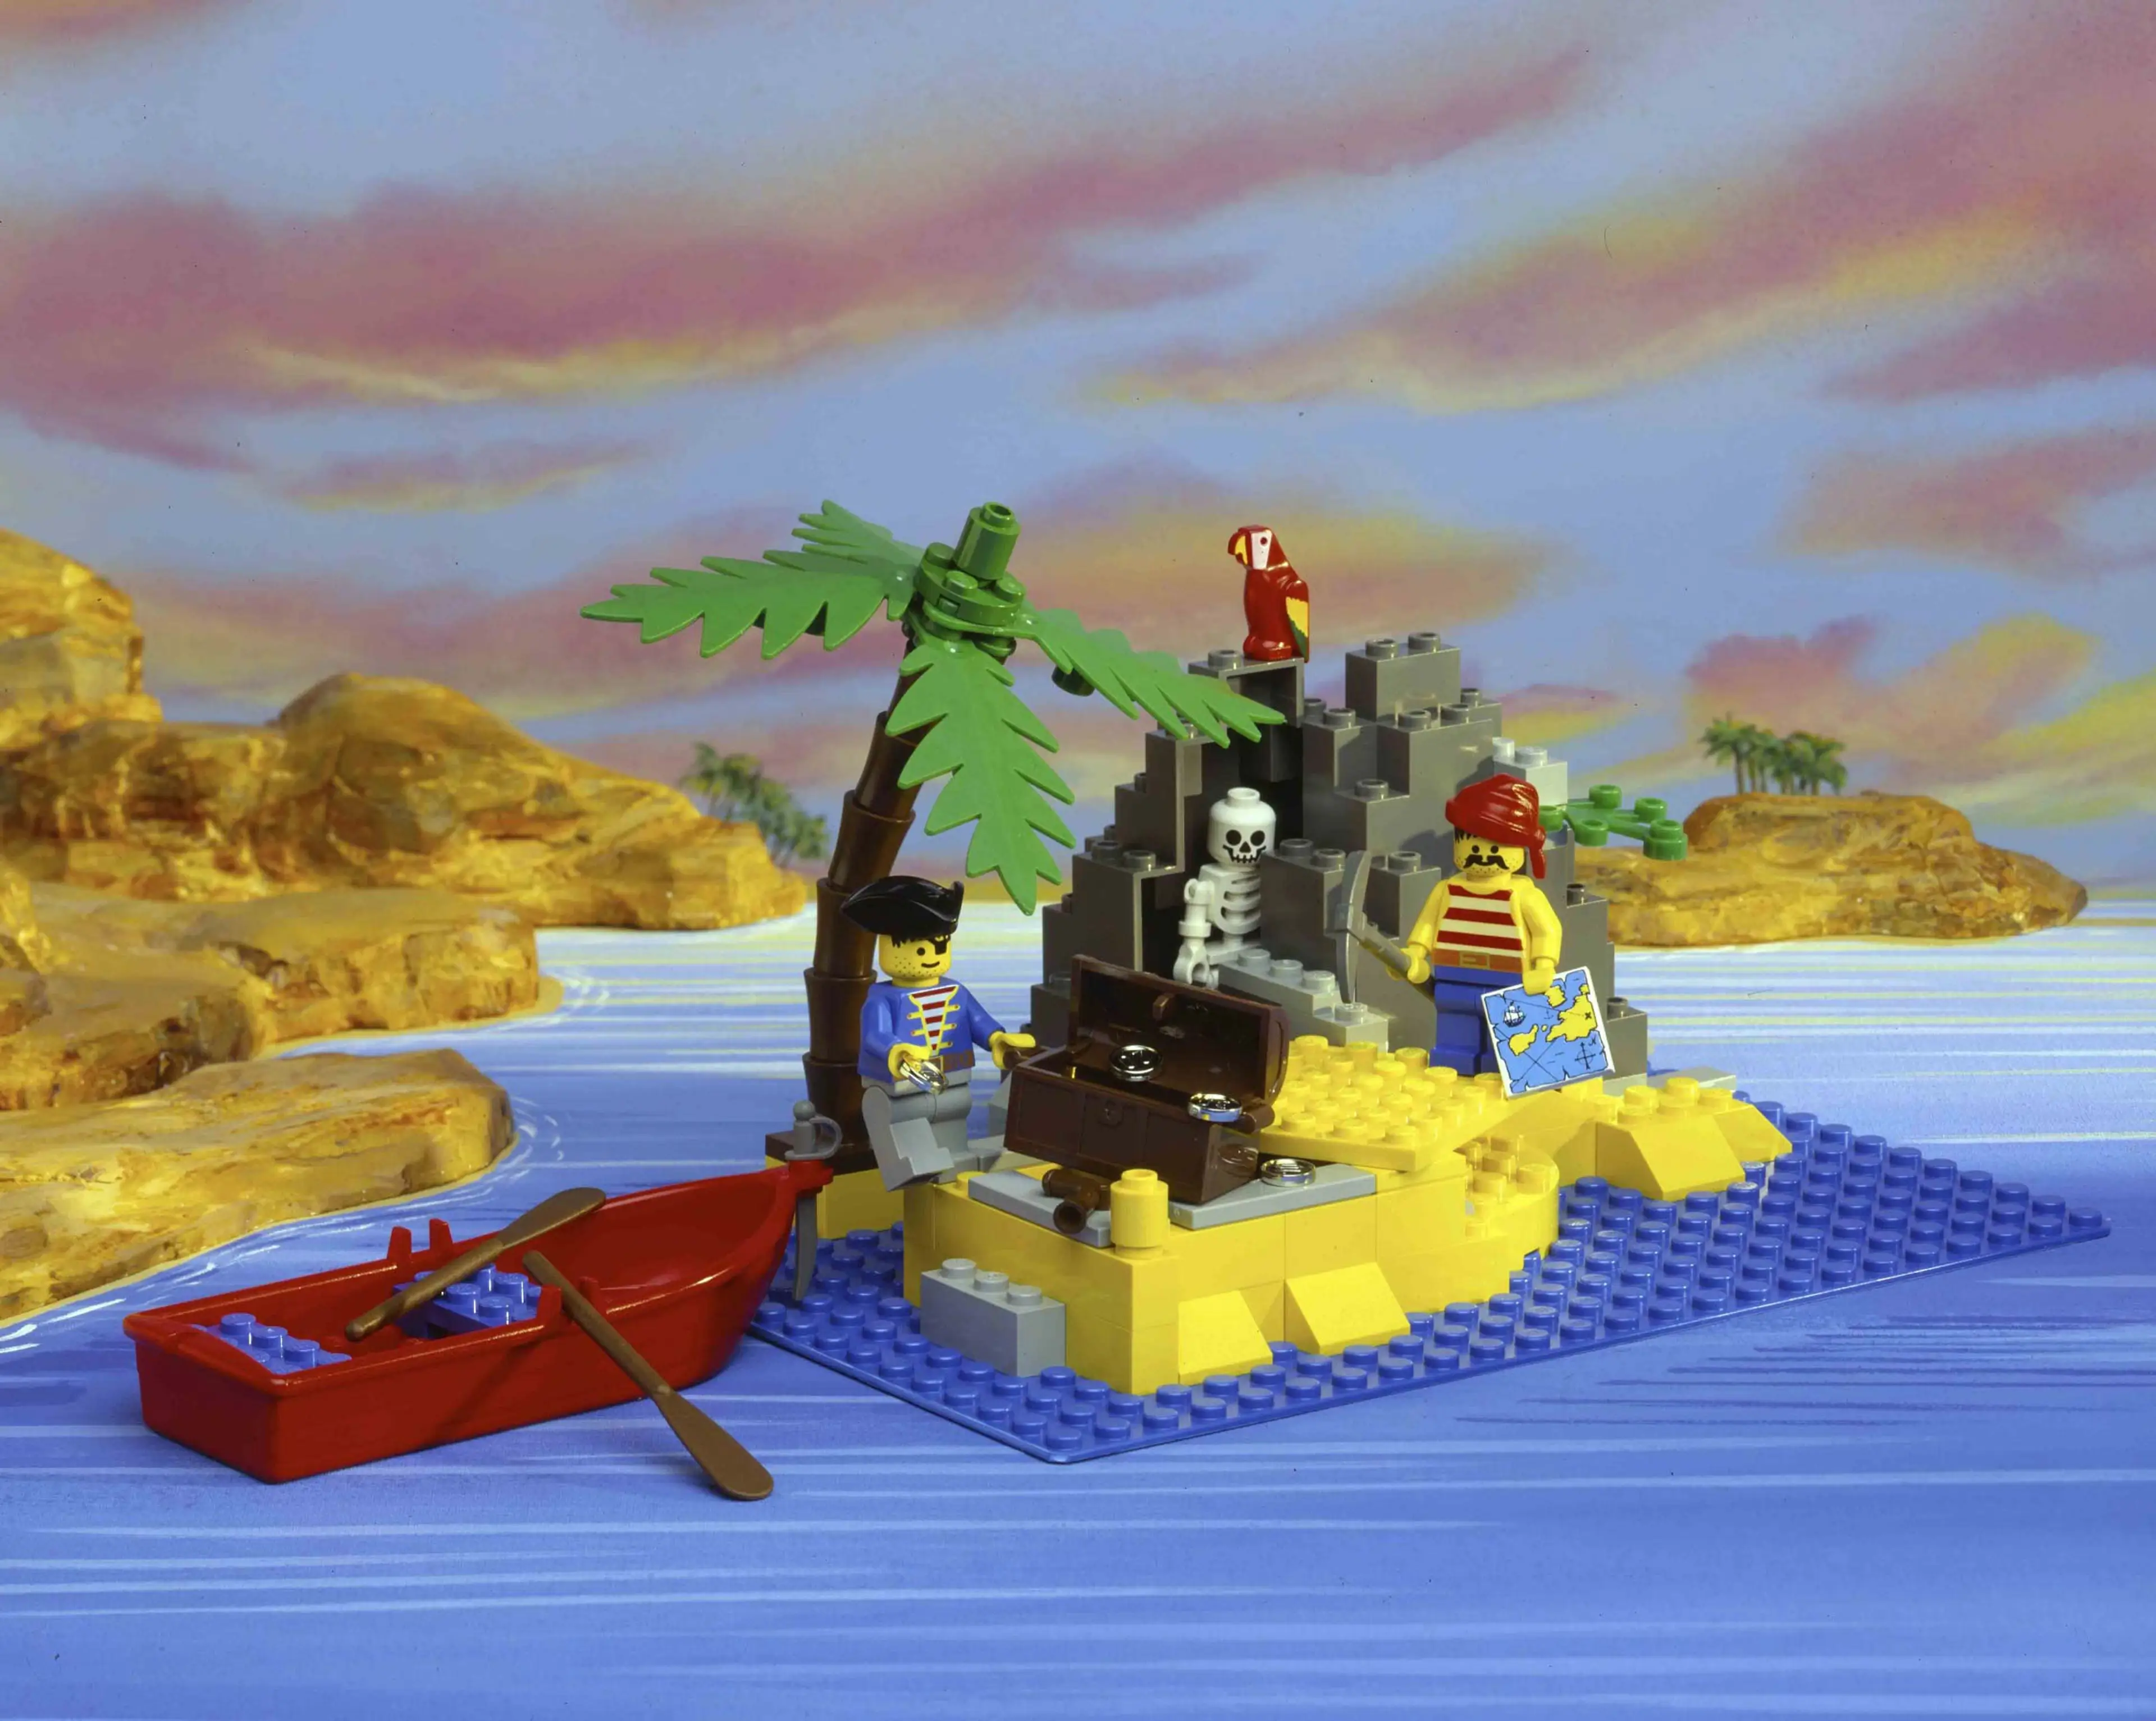 Small LEGO Pirates set comprising of two minifigures, a skeleton, a parrot, a boat and a small deserted island